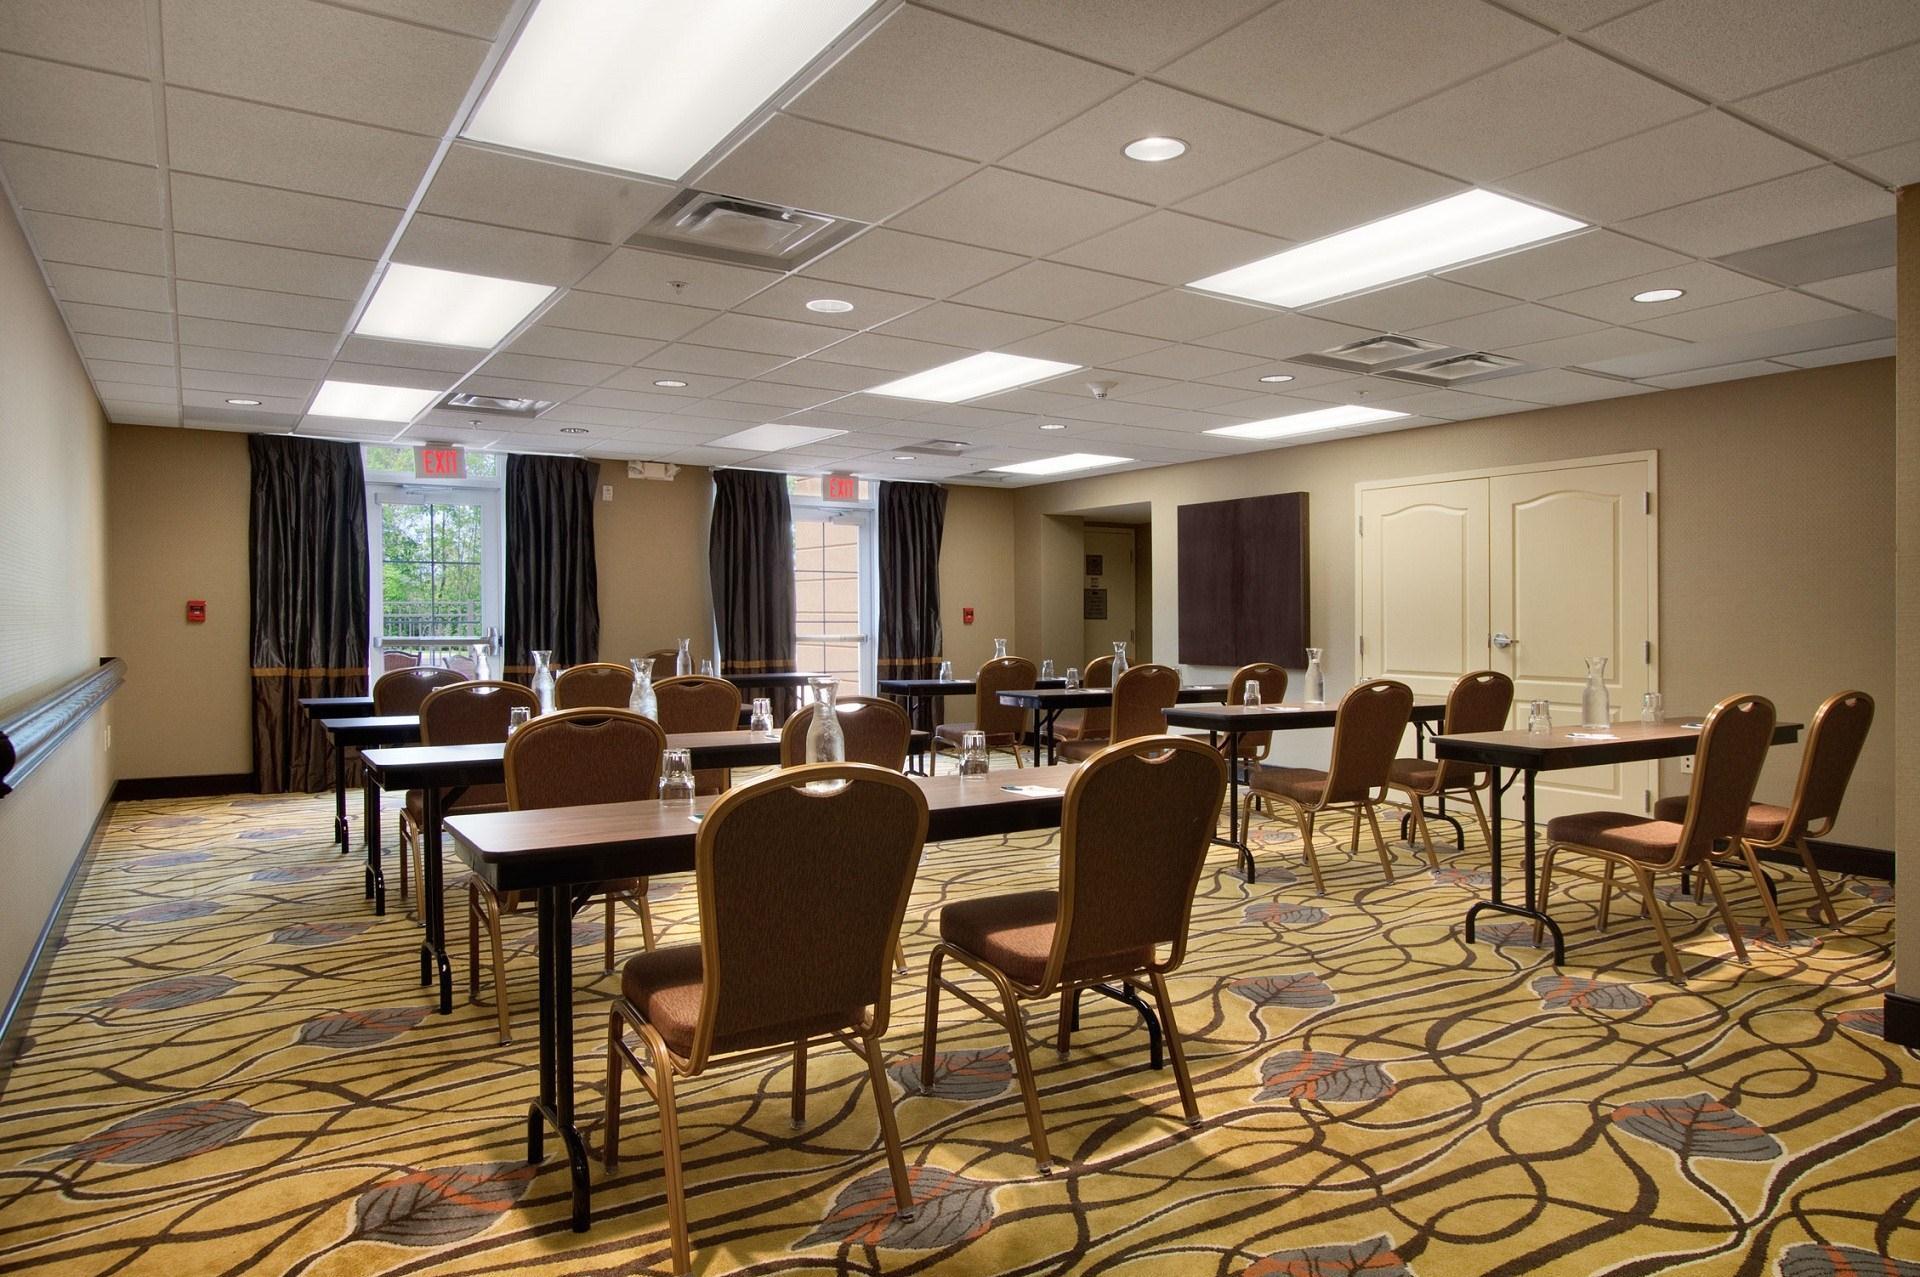 Homewood Suites by Hilton Rochester/Greece, NY in Rochester, NY